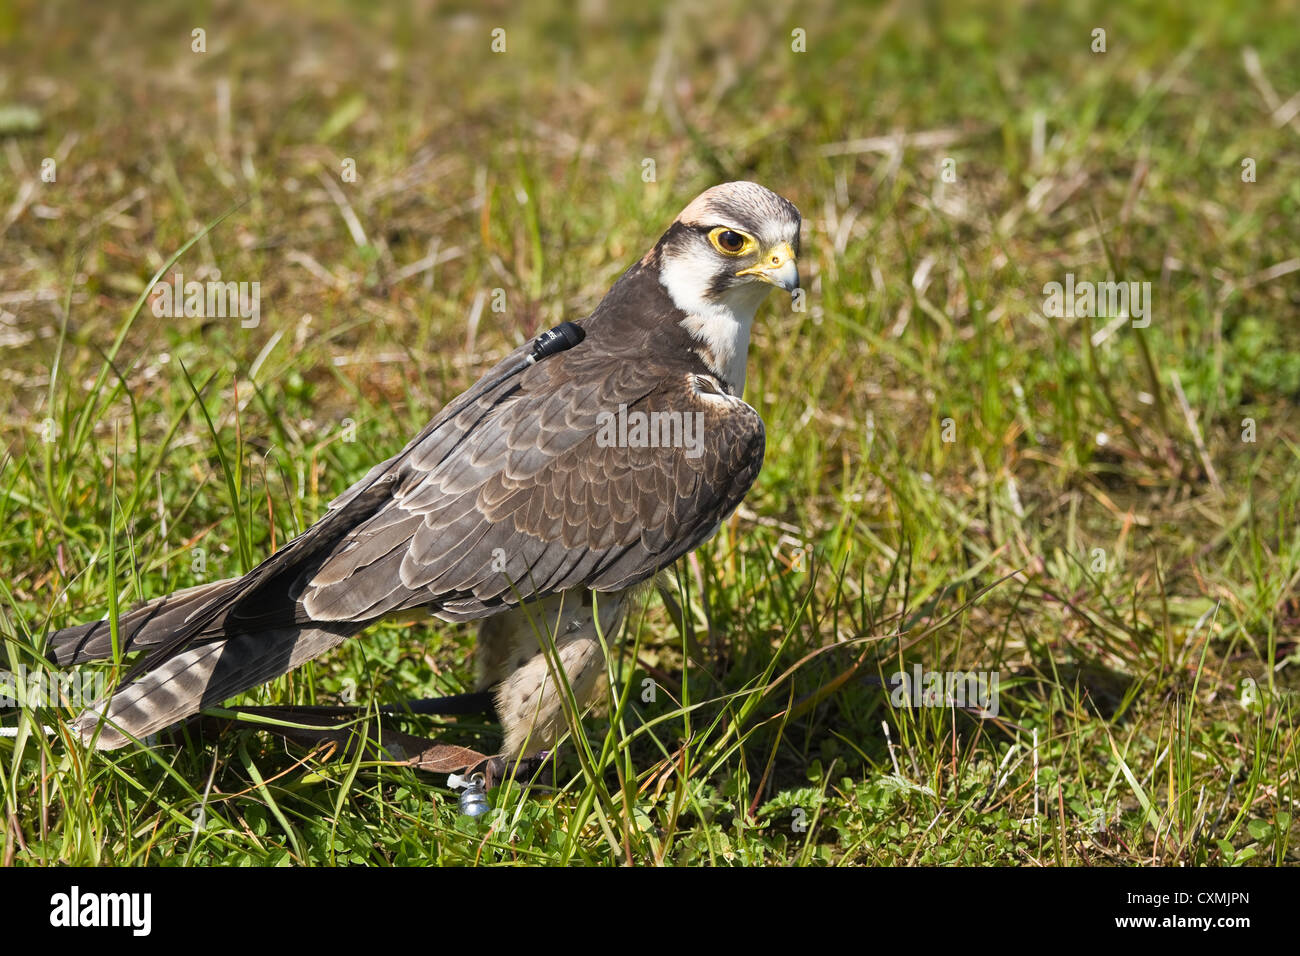 falconFalcon from falconry with transmitter (radio telemetry) on the back Stock Photo